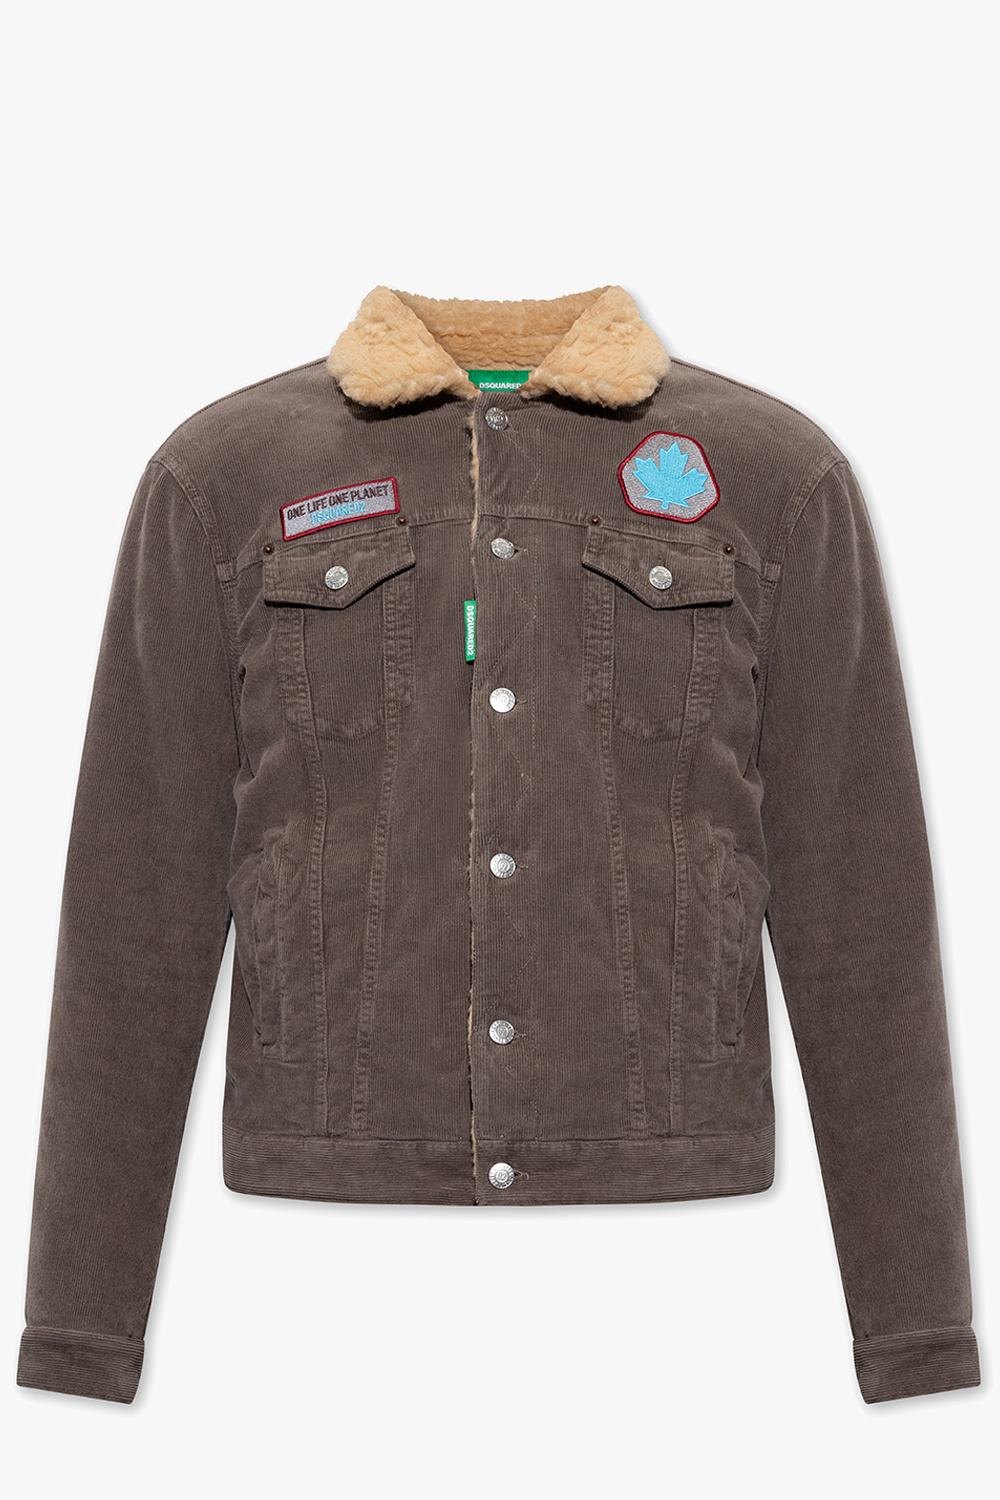 Dsquared2 ‘Dan’ jacket from ‘One Life One Planet’ collection